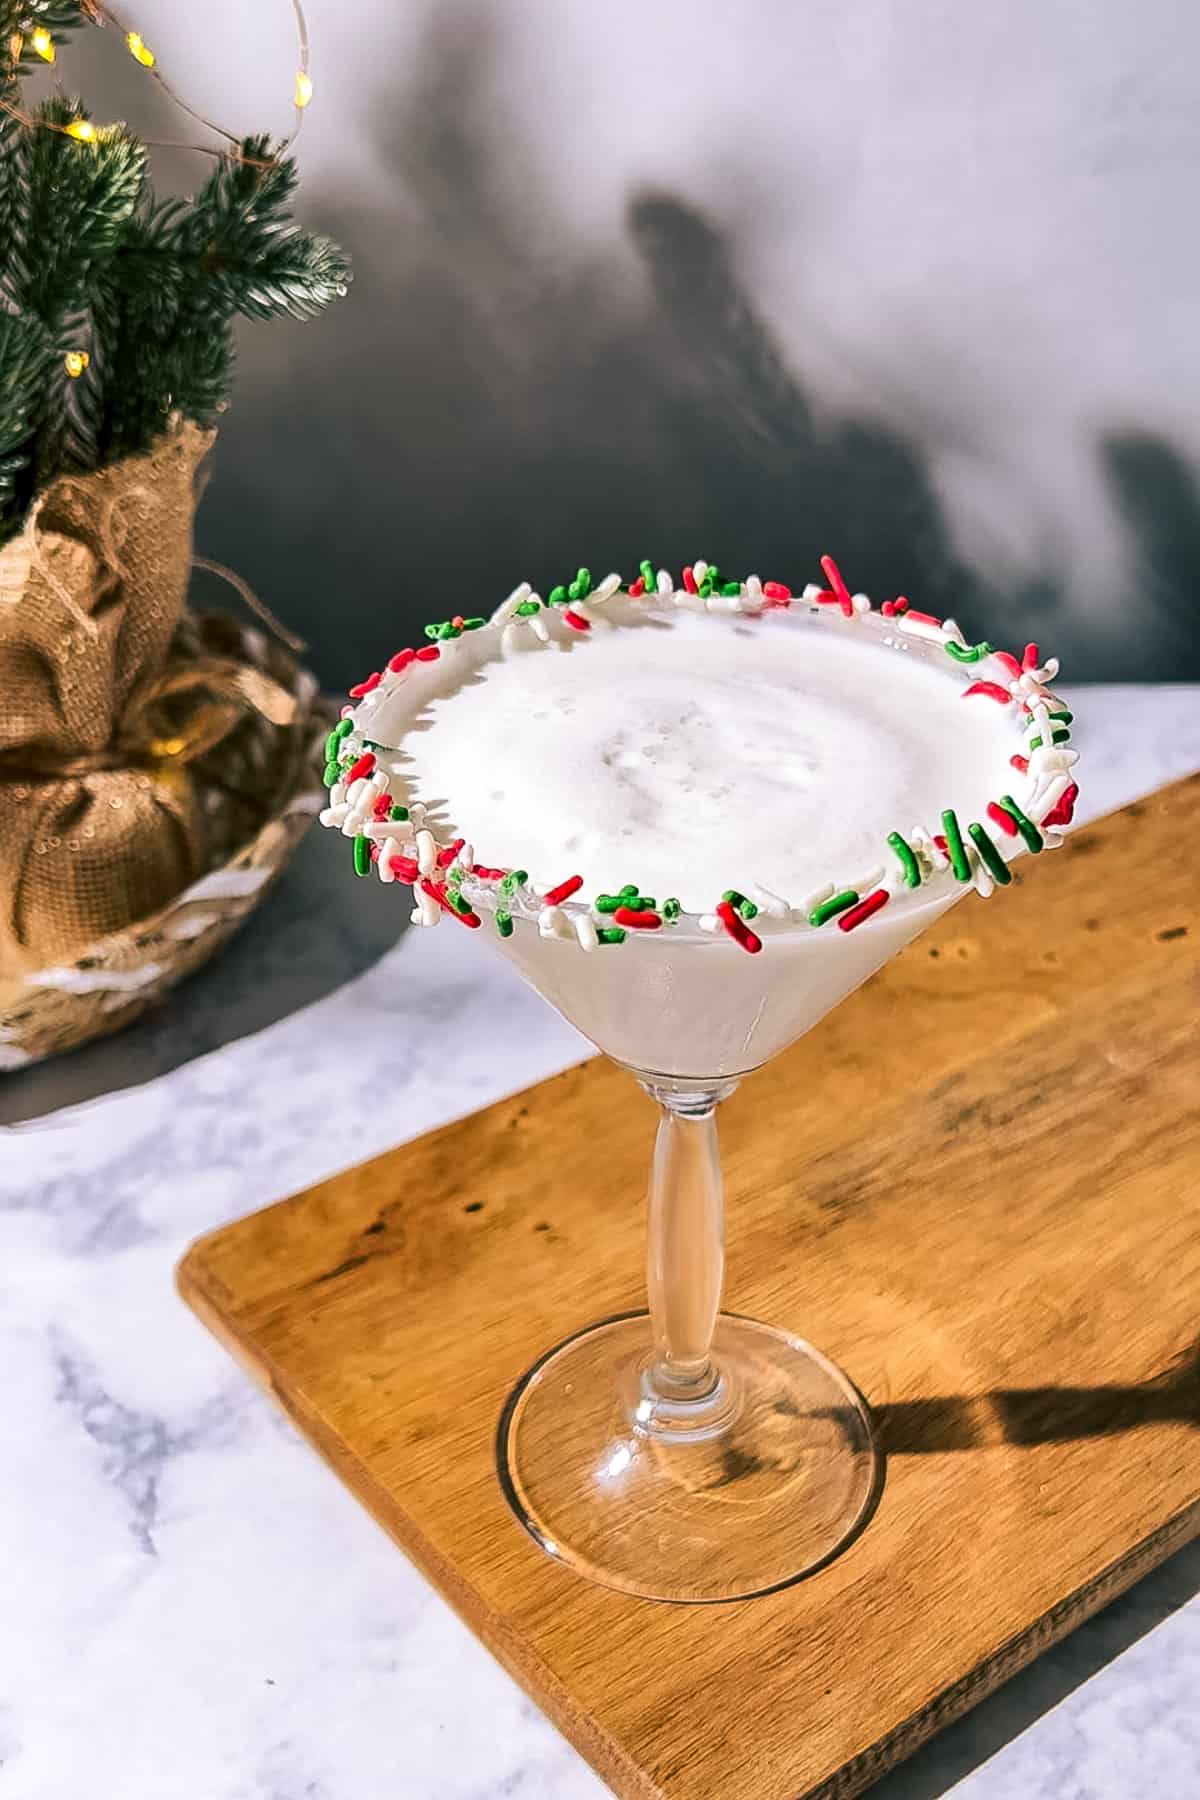 Sugar cookie martini garnished with a sprinkle rim.